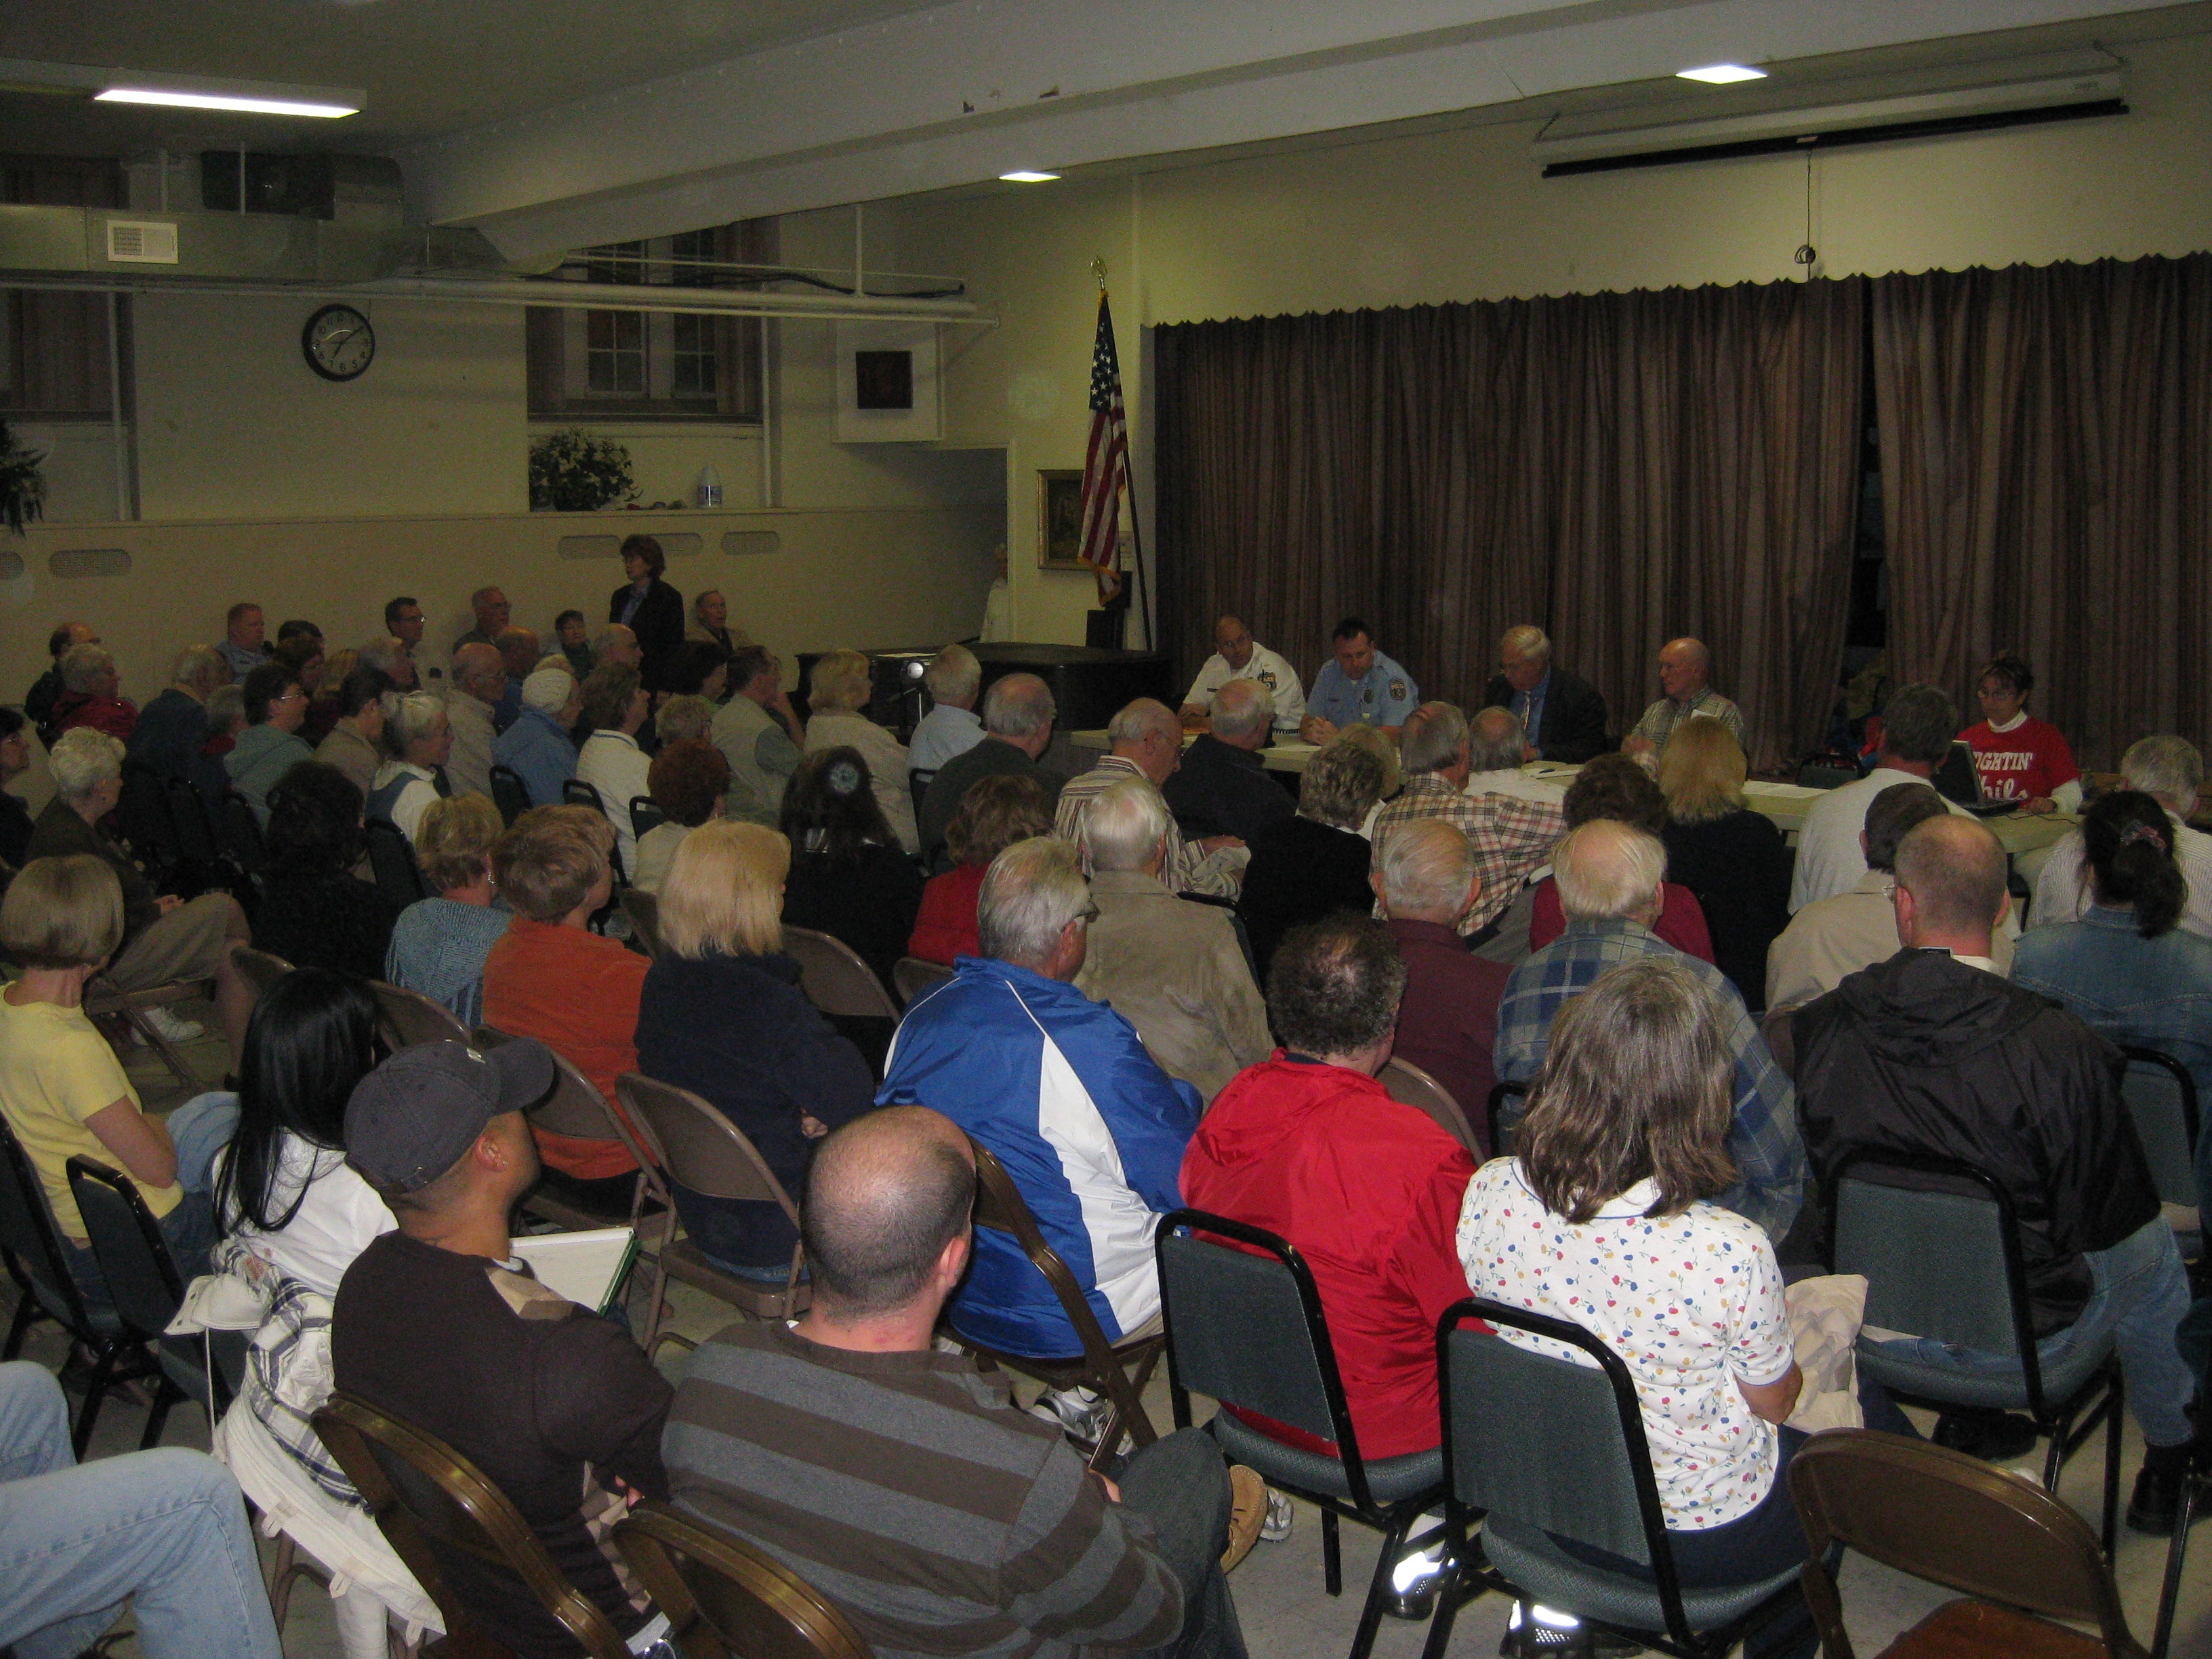 Residents from all over the Northeast attended the Burholme community meeting to learn about the Northeast's history. Photo by Christopher Wink.